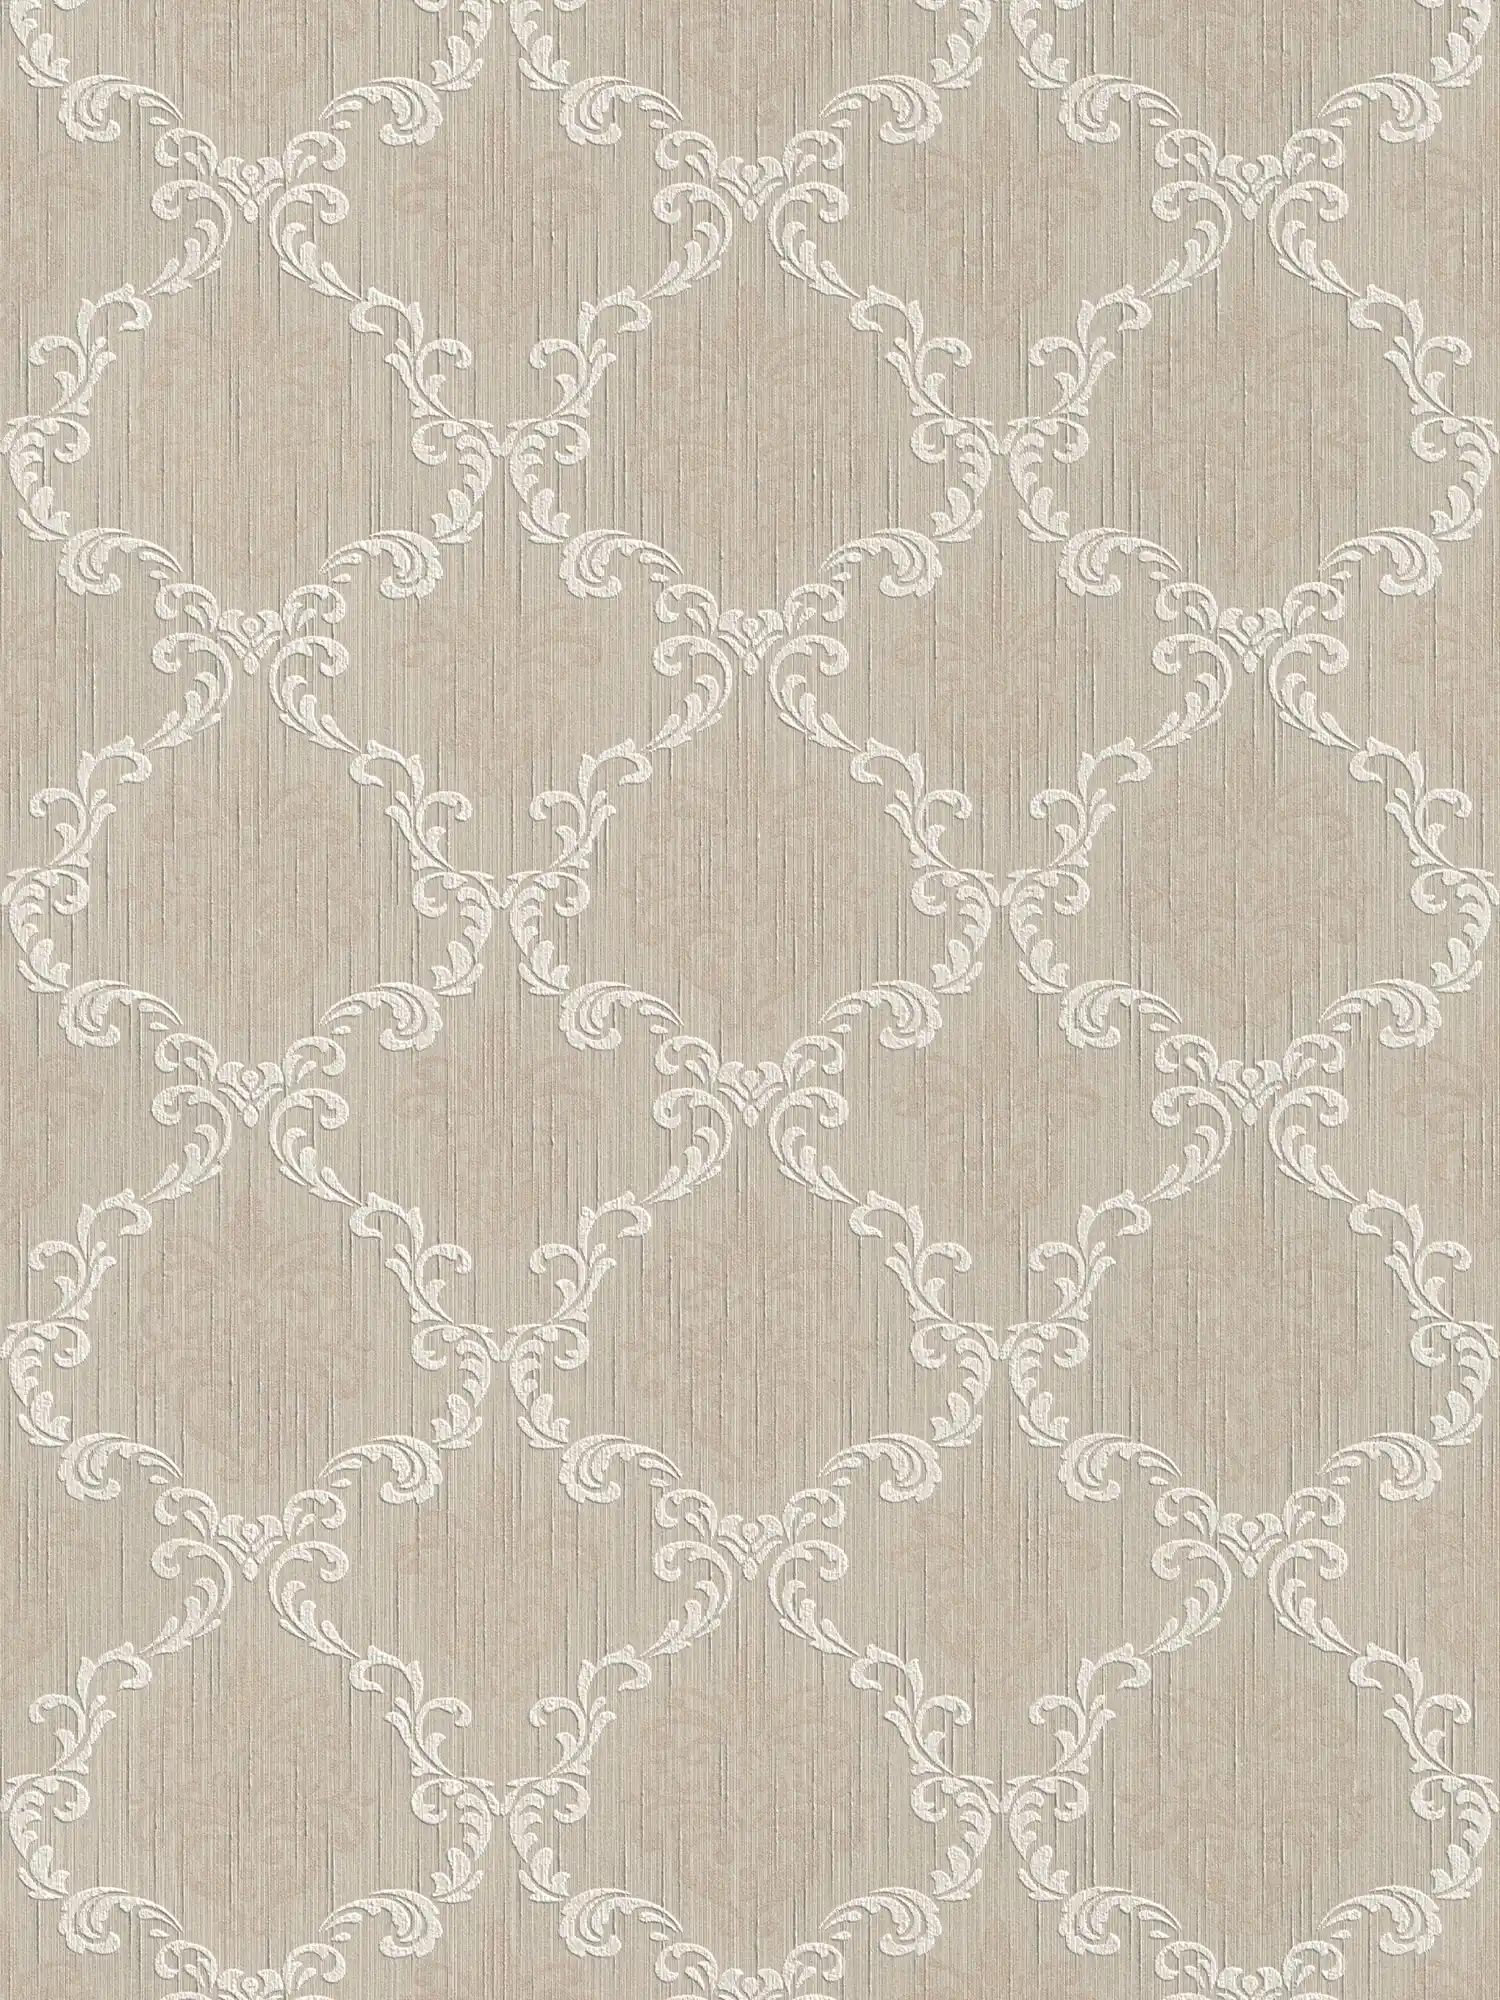 Ornamental wallpaper with tendril pattern & texture effect - beige
